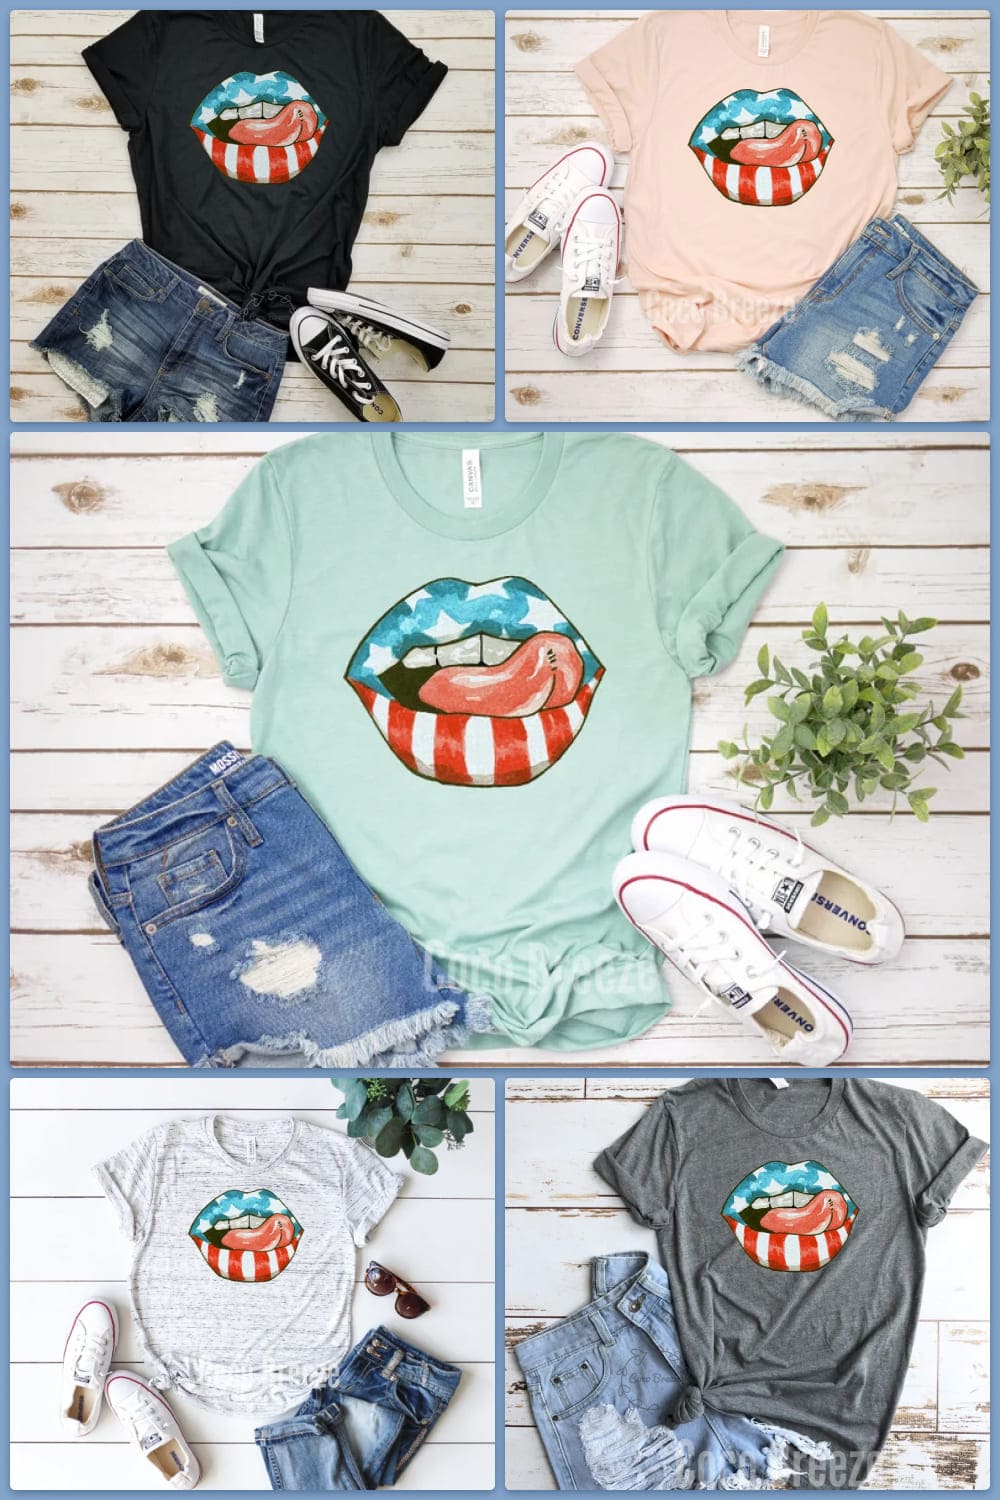 Collage of colorful t-shirts with the US flag in the shape of lips.